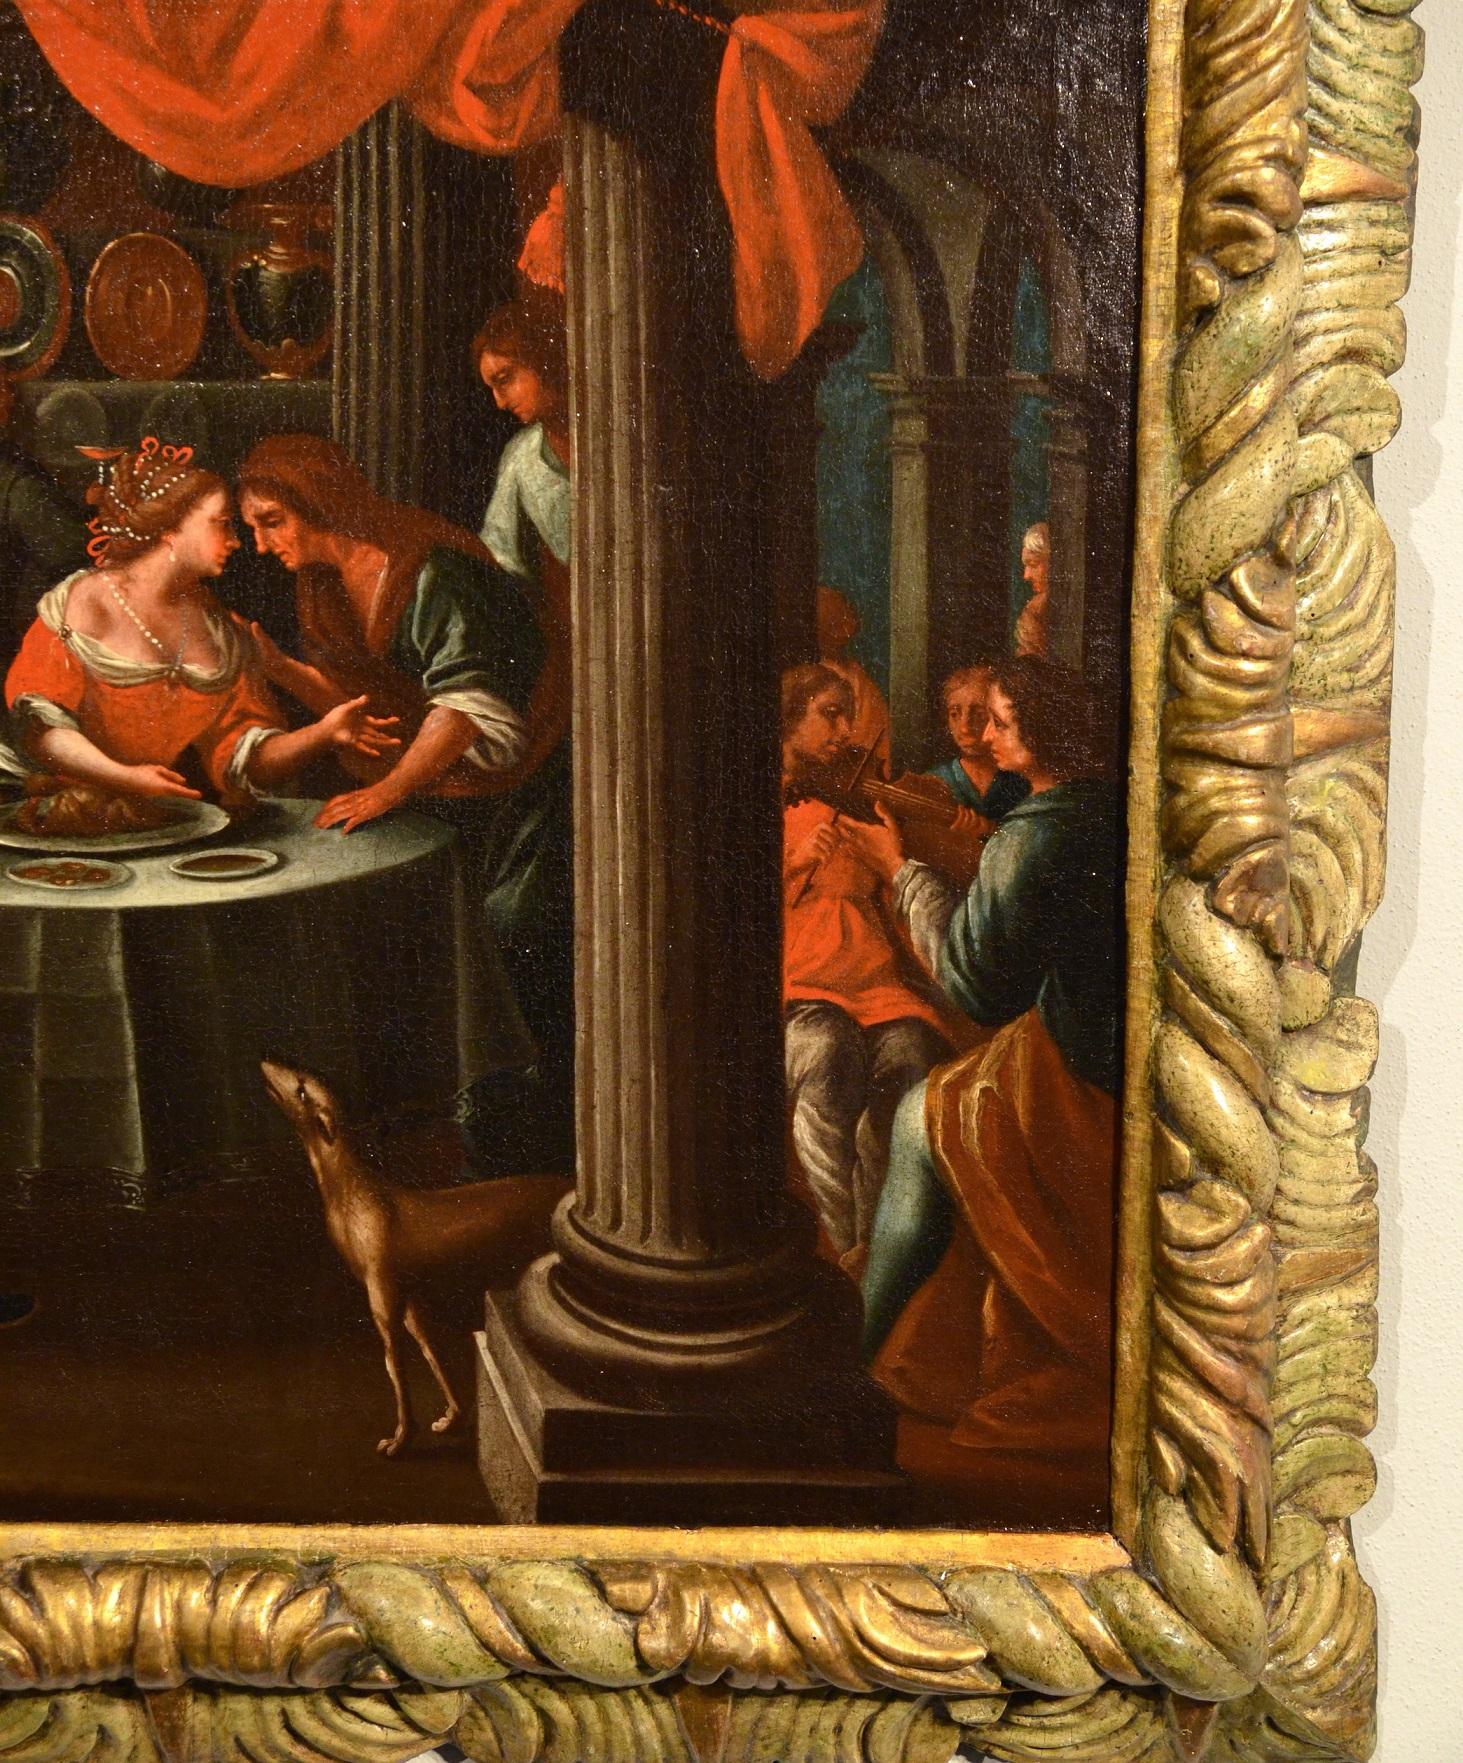 The pleasures of the prodigal son
Flemish painter active in Veneto in the early 17th century

Oil painting on canvas
Cm. 62 x 74
With antique carved and lacquered frame cm. 82 x 95

We are witnessing a sumptuous banquet, set in a sumptuous setting